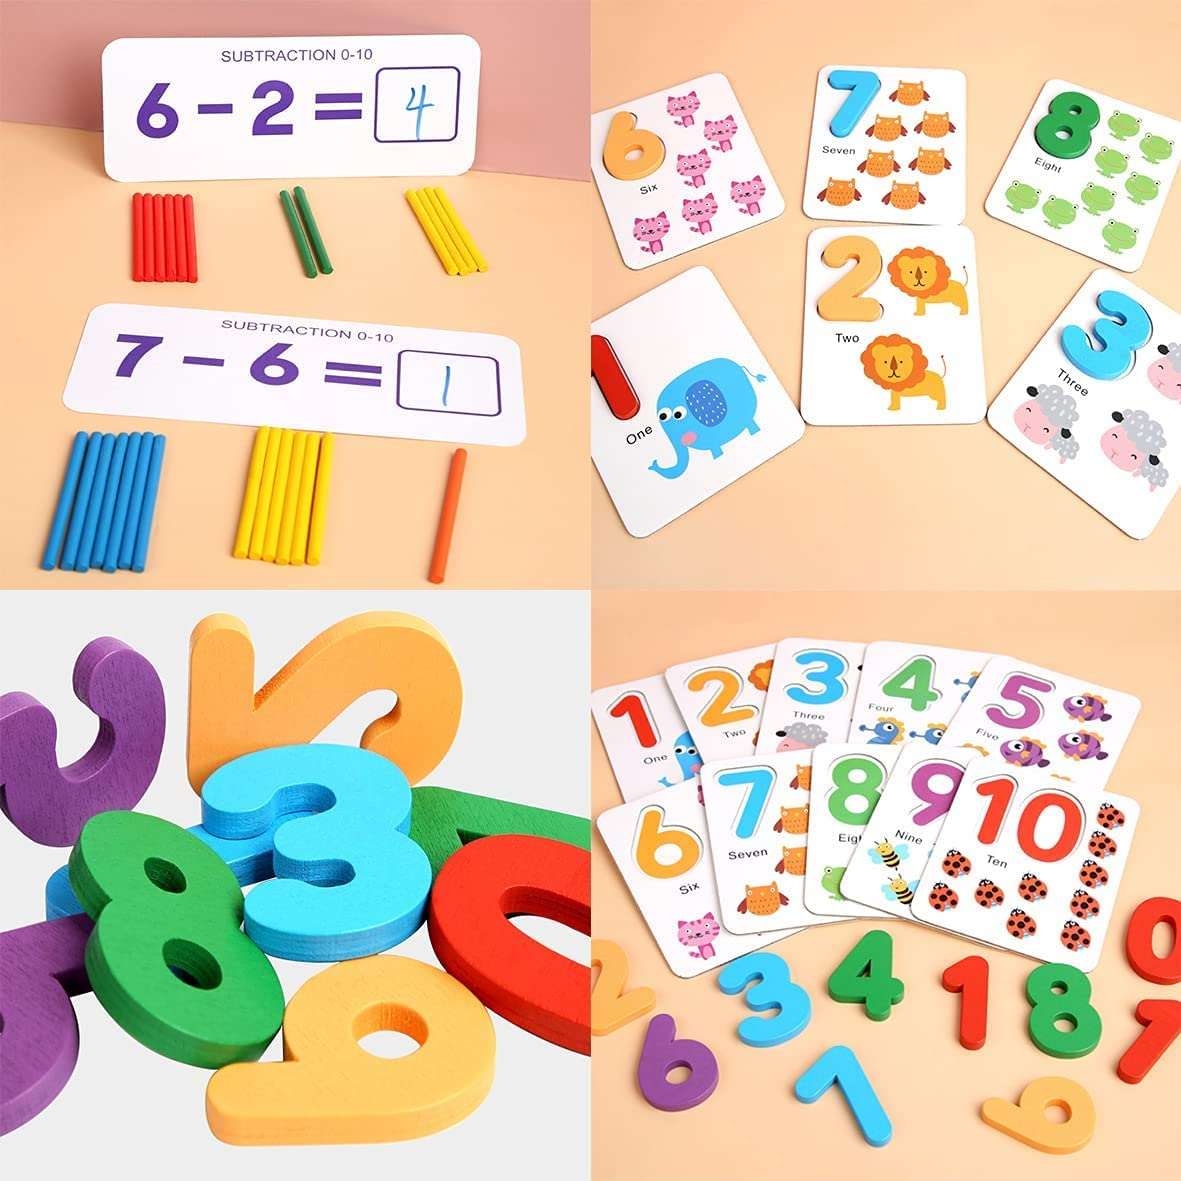 I Love Mathematic Learning Toy